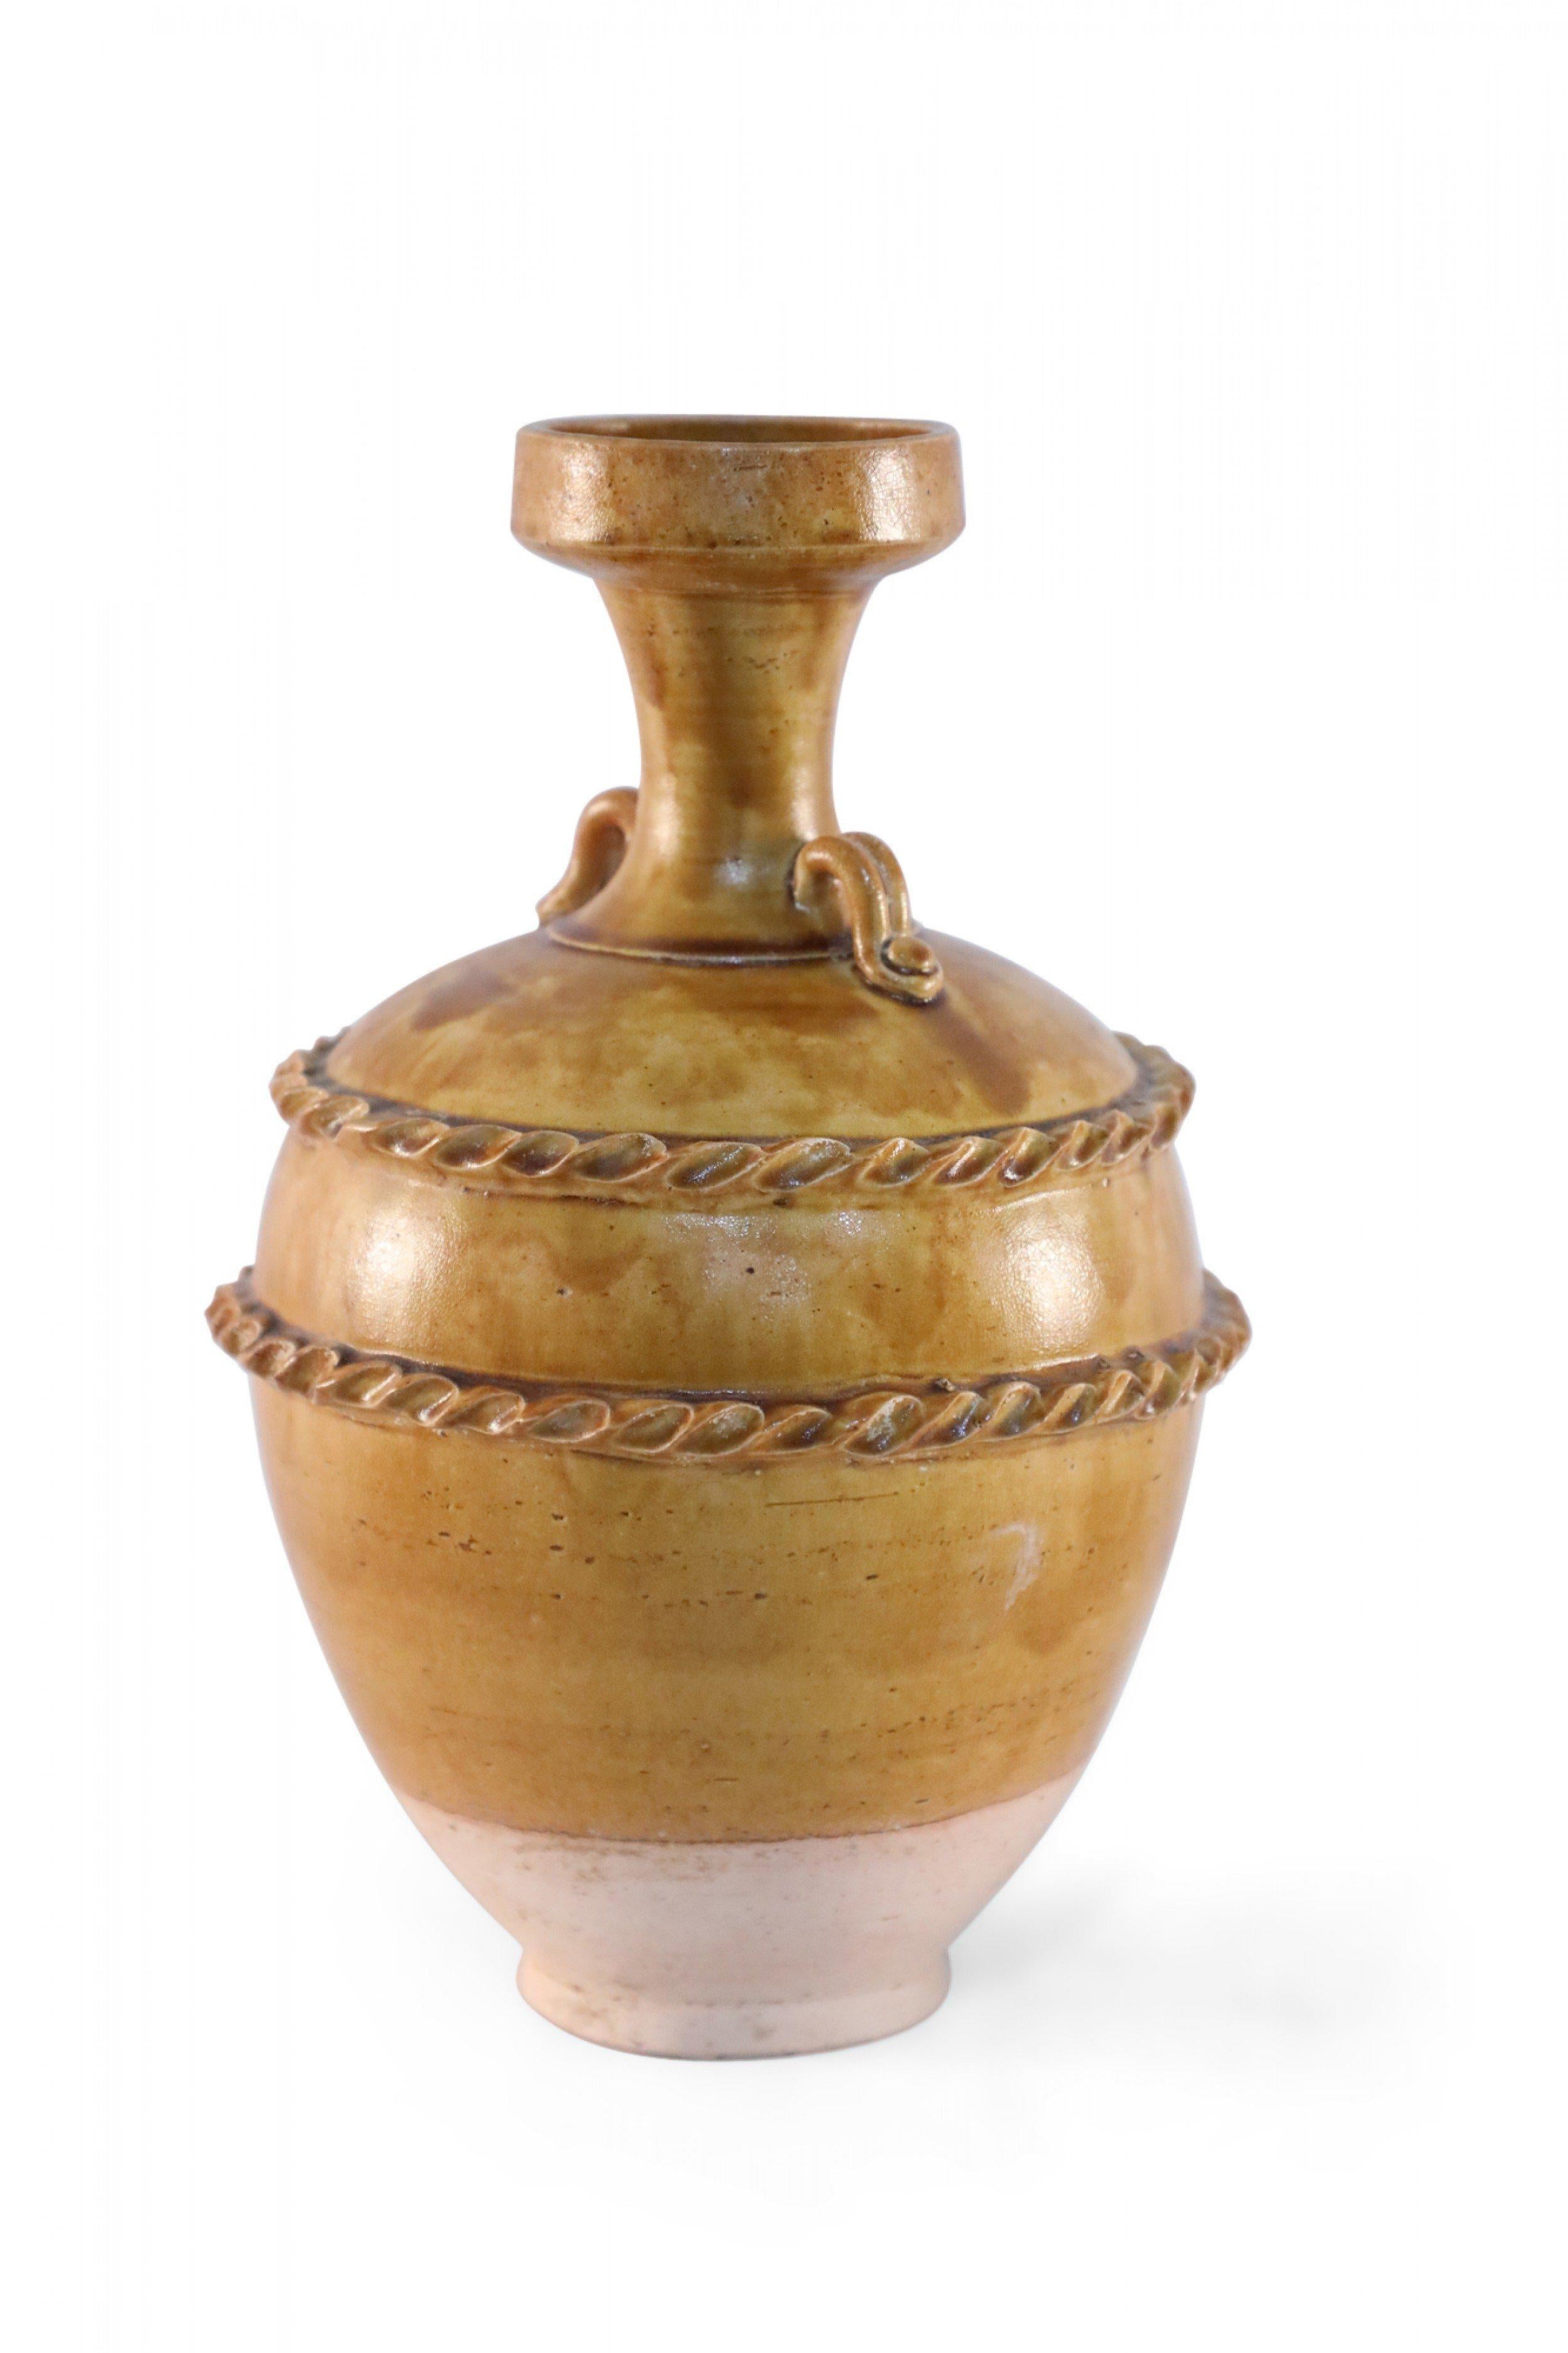 Antique Chinese (replica of a 14th Century-style) handled vase with a pale pink base and a burnished tan body showing highs and lows in the finish, wrapped in two ribboned rope-like bands.